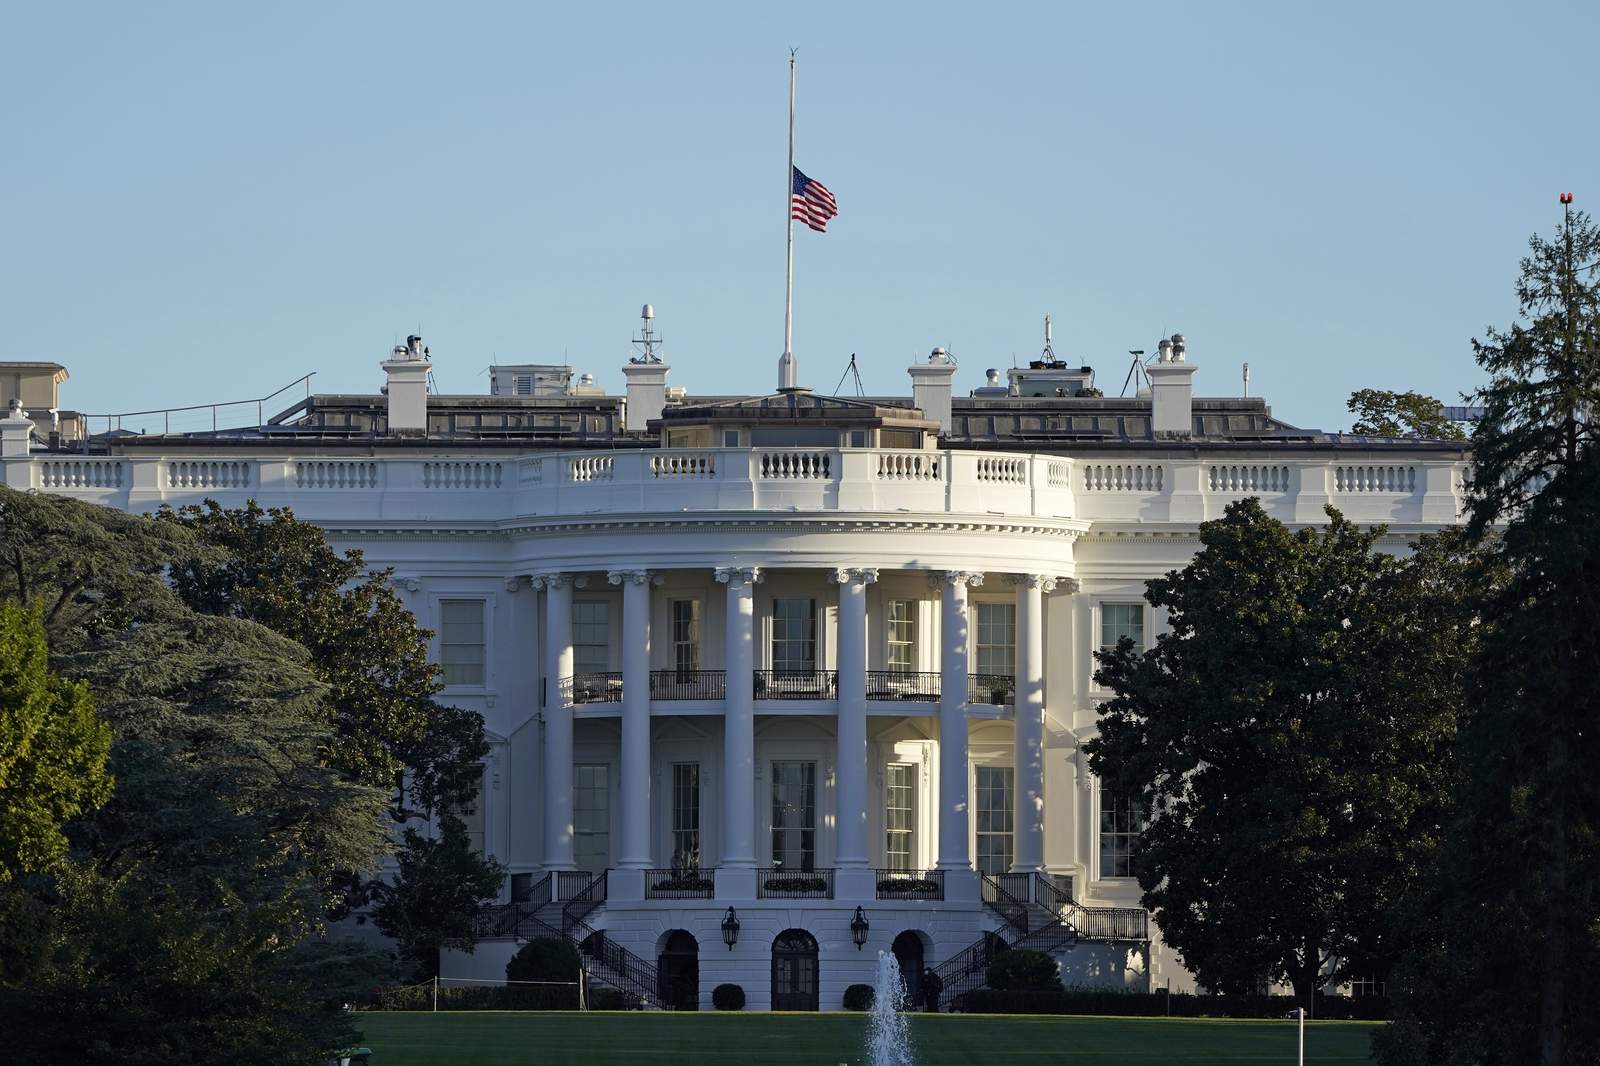 AP source: Envelope addressed to White House contained ricin